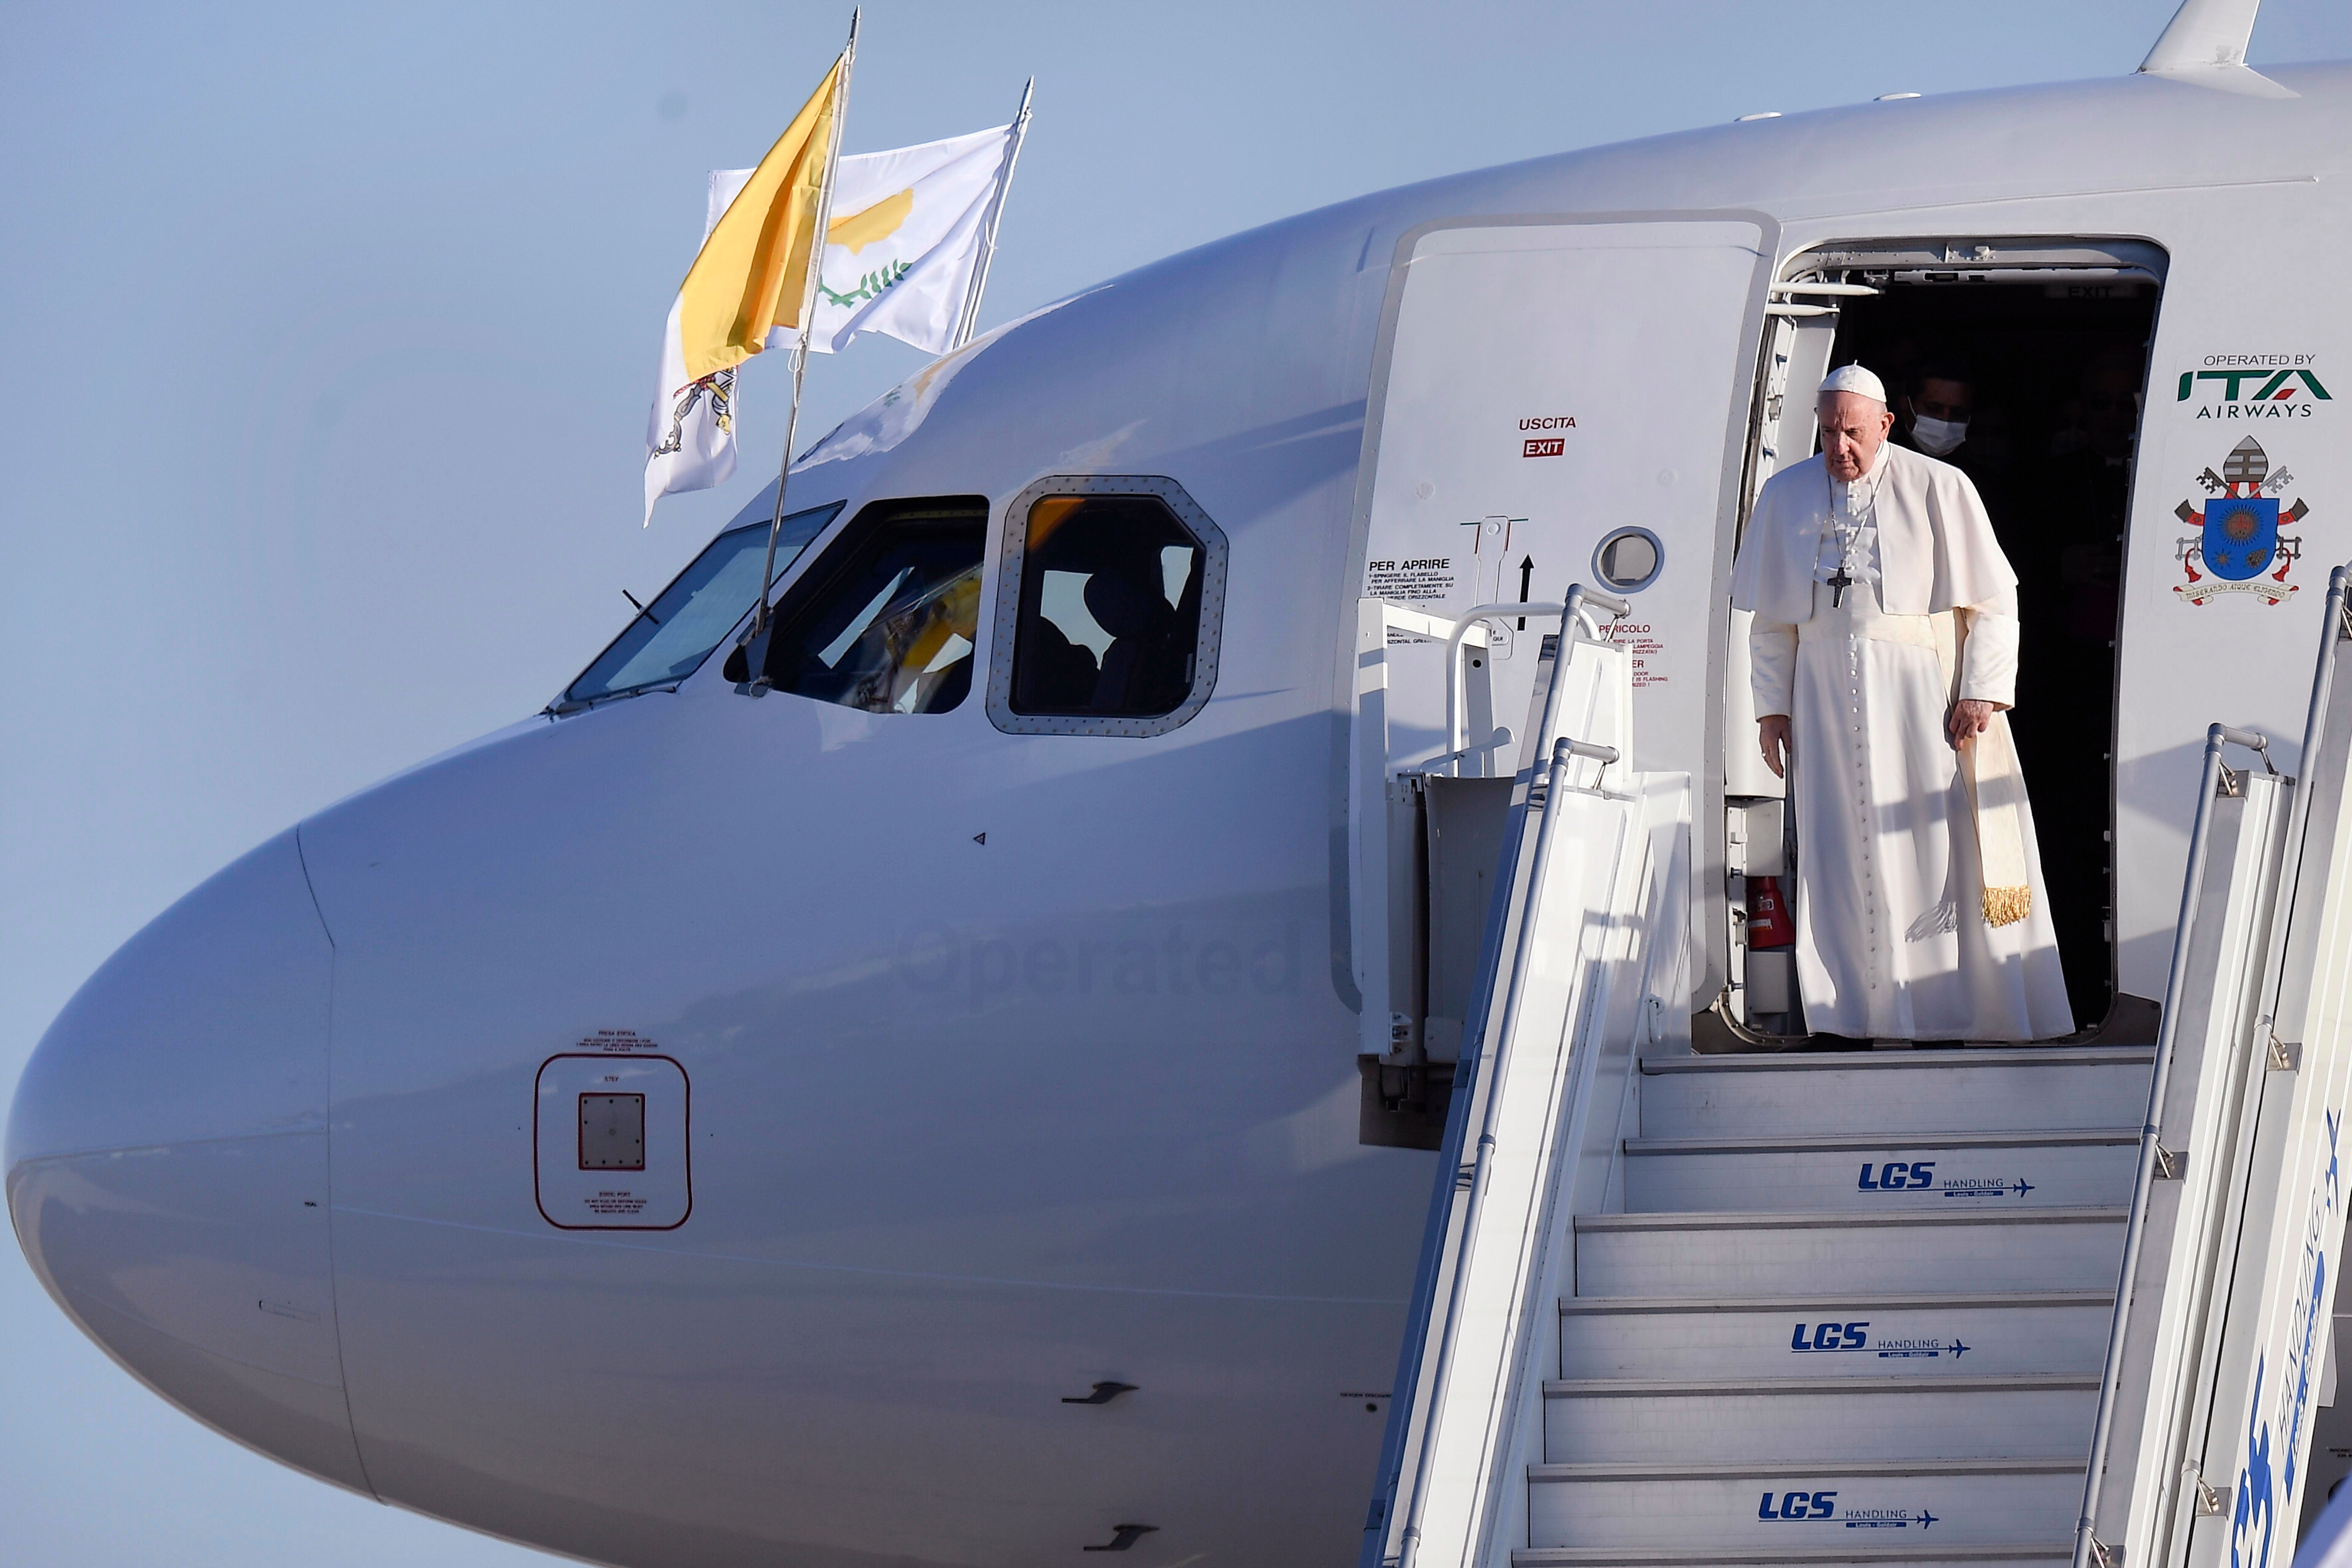 Pope Francis disembarking in Cyprus from ITA aircraft